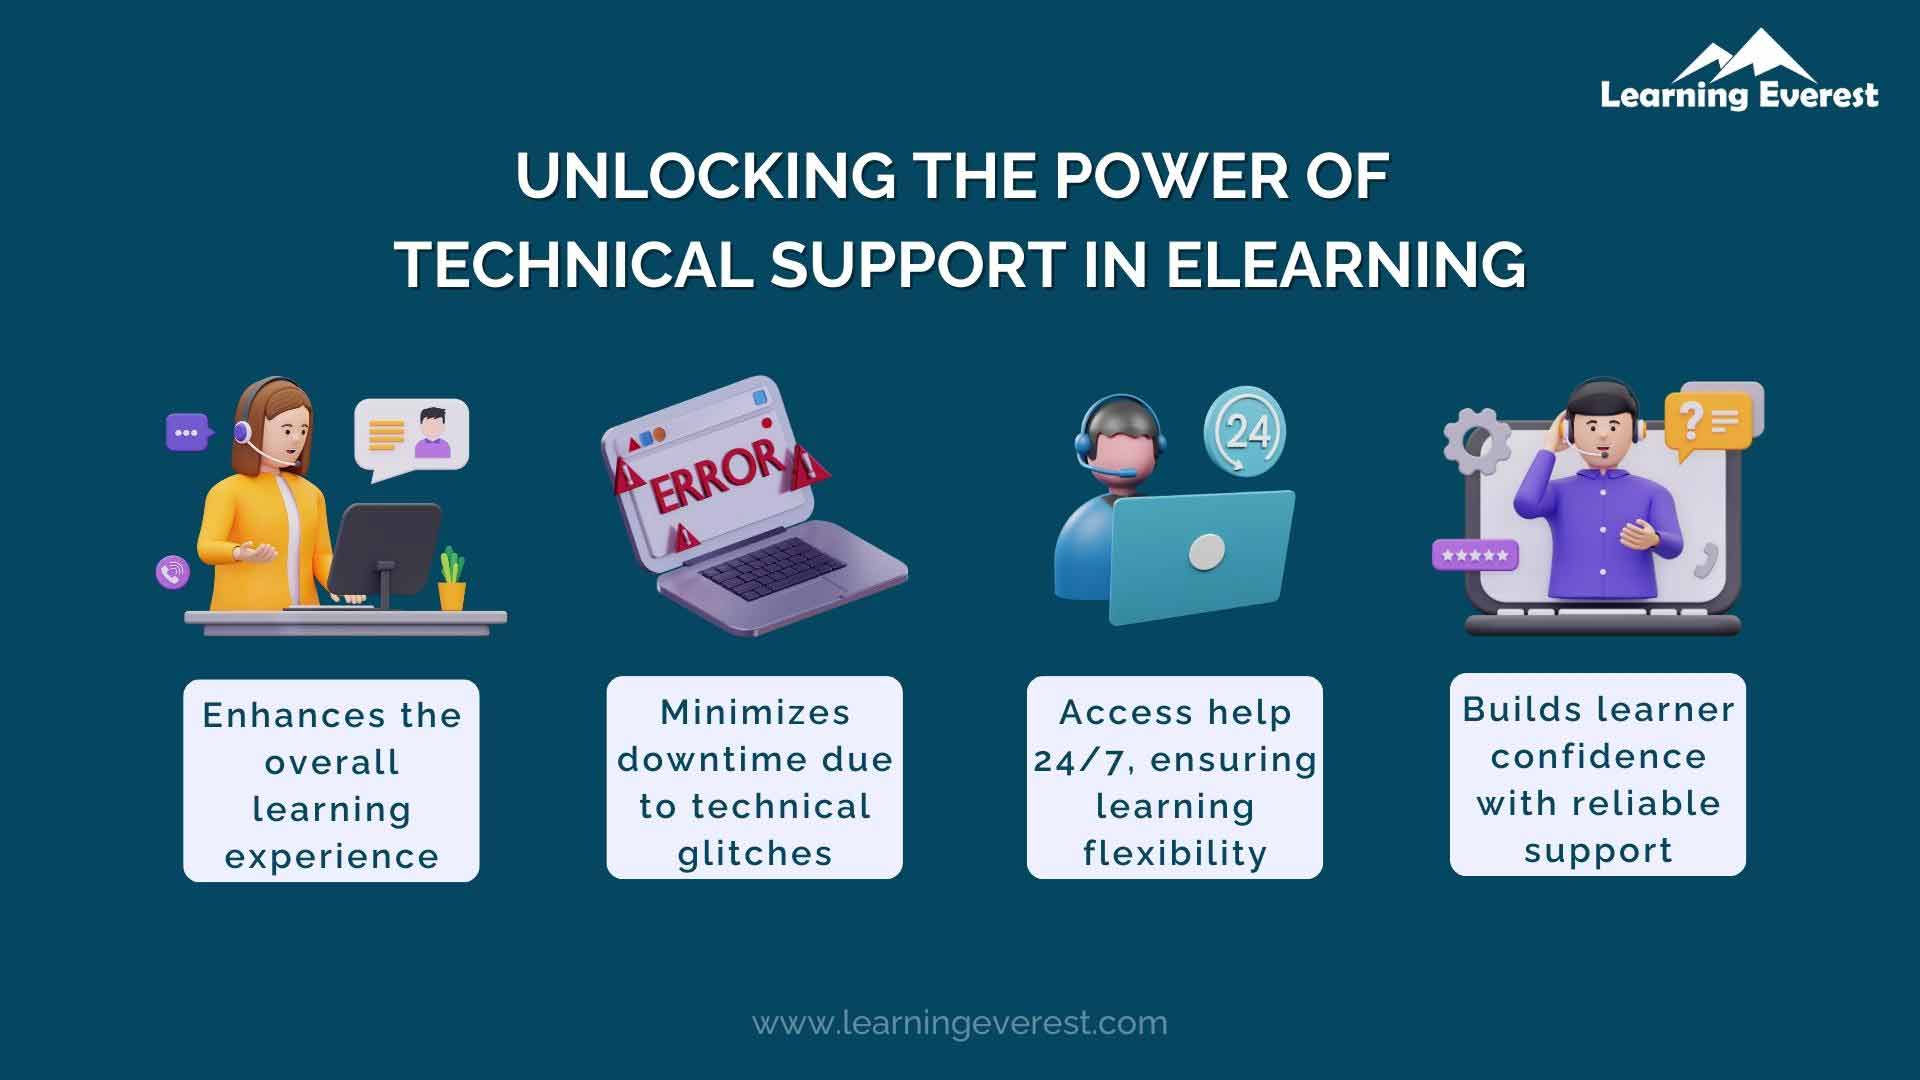 Requirements for eLearning - Technical Support and Infrastructure